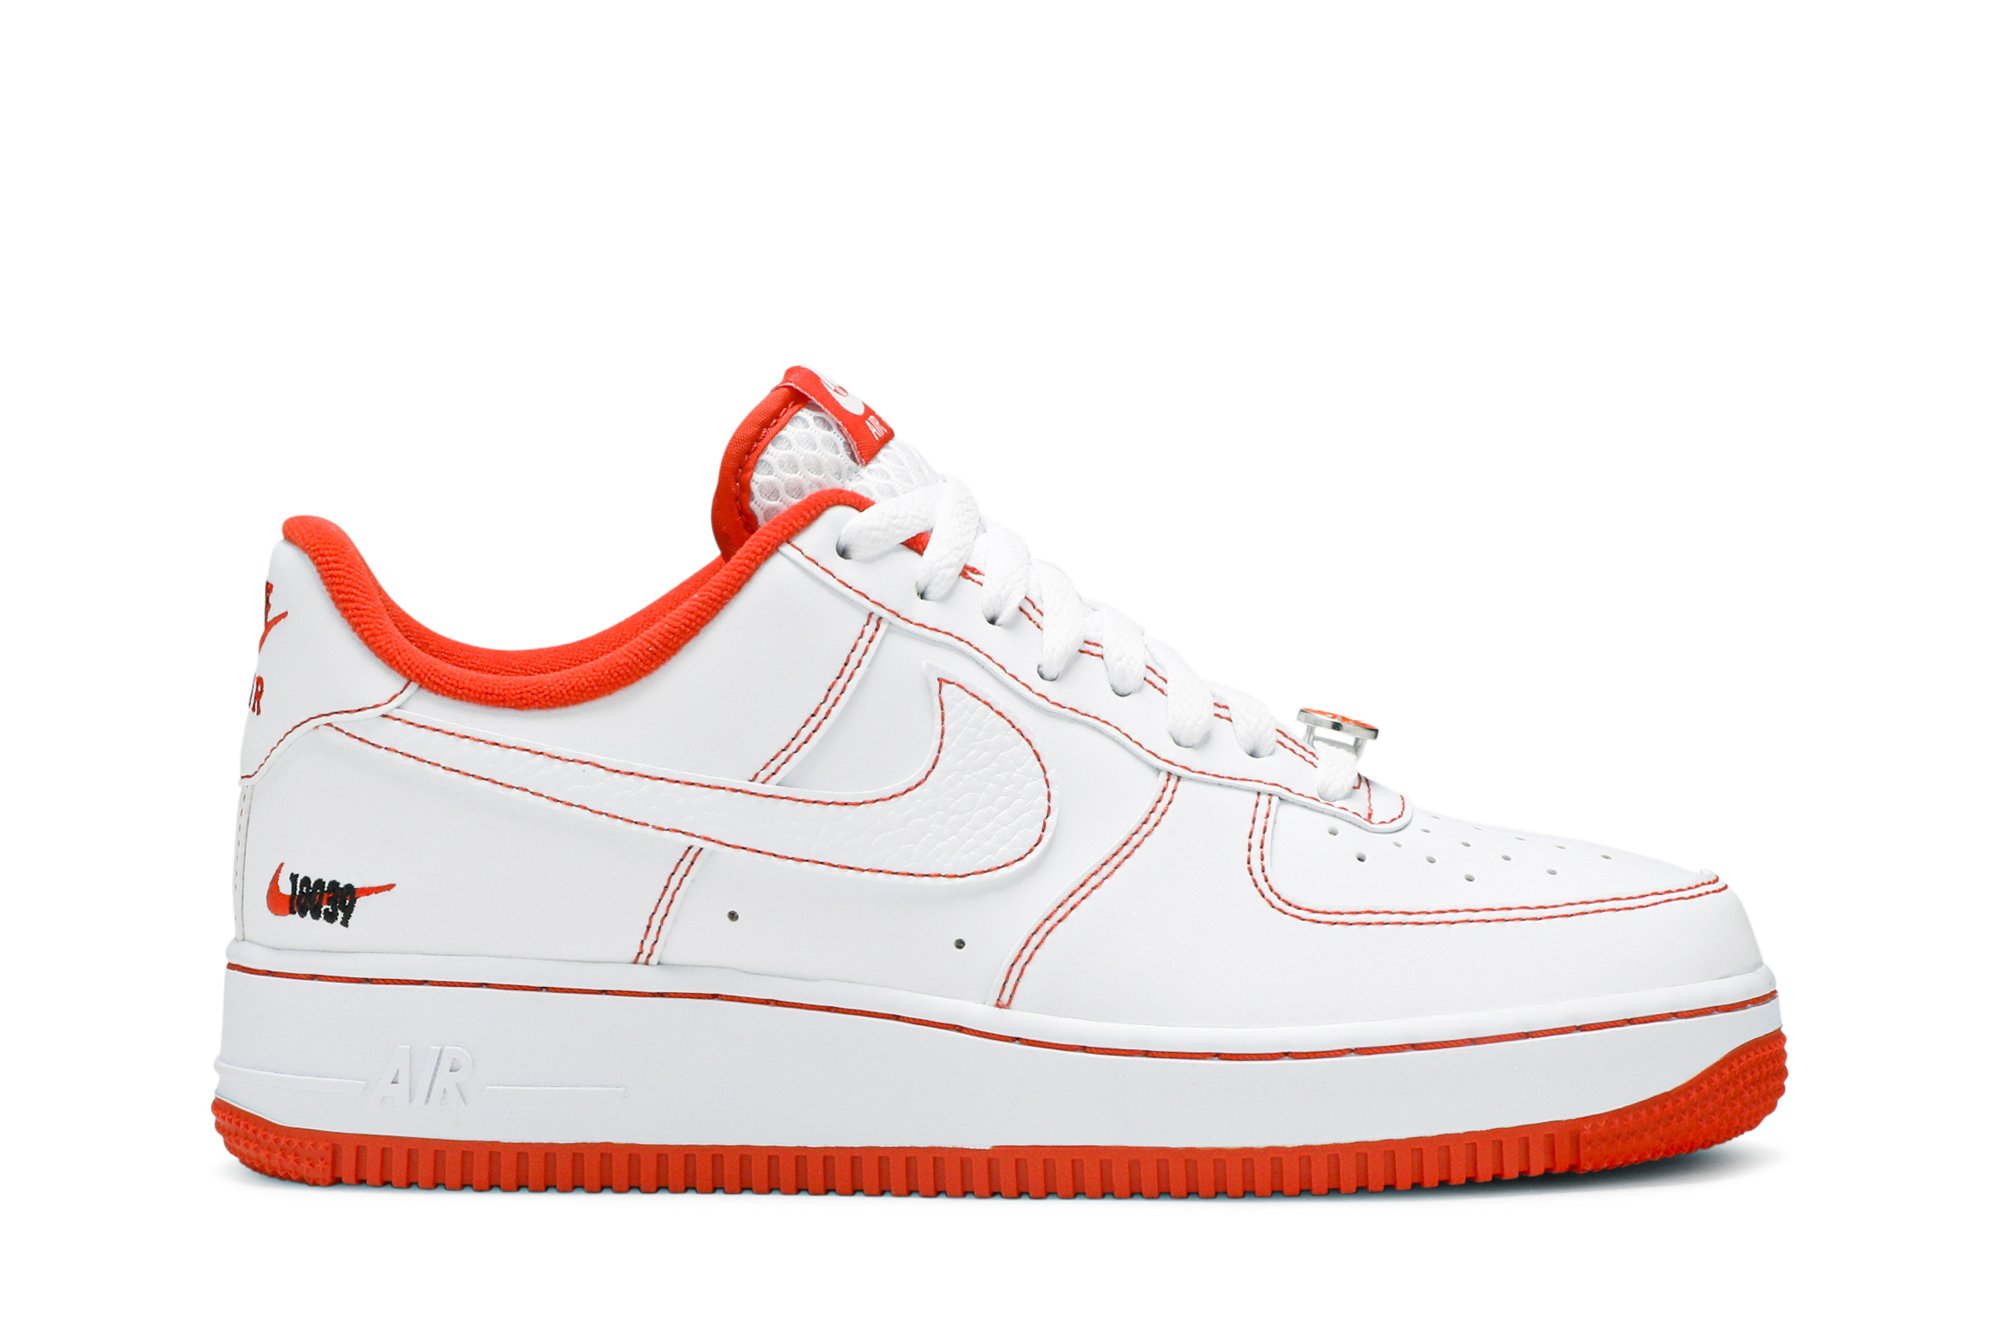 Buy Air Force 1 Low 'Rucker Park' - CT2585 100 | GOAT